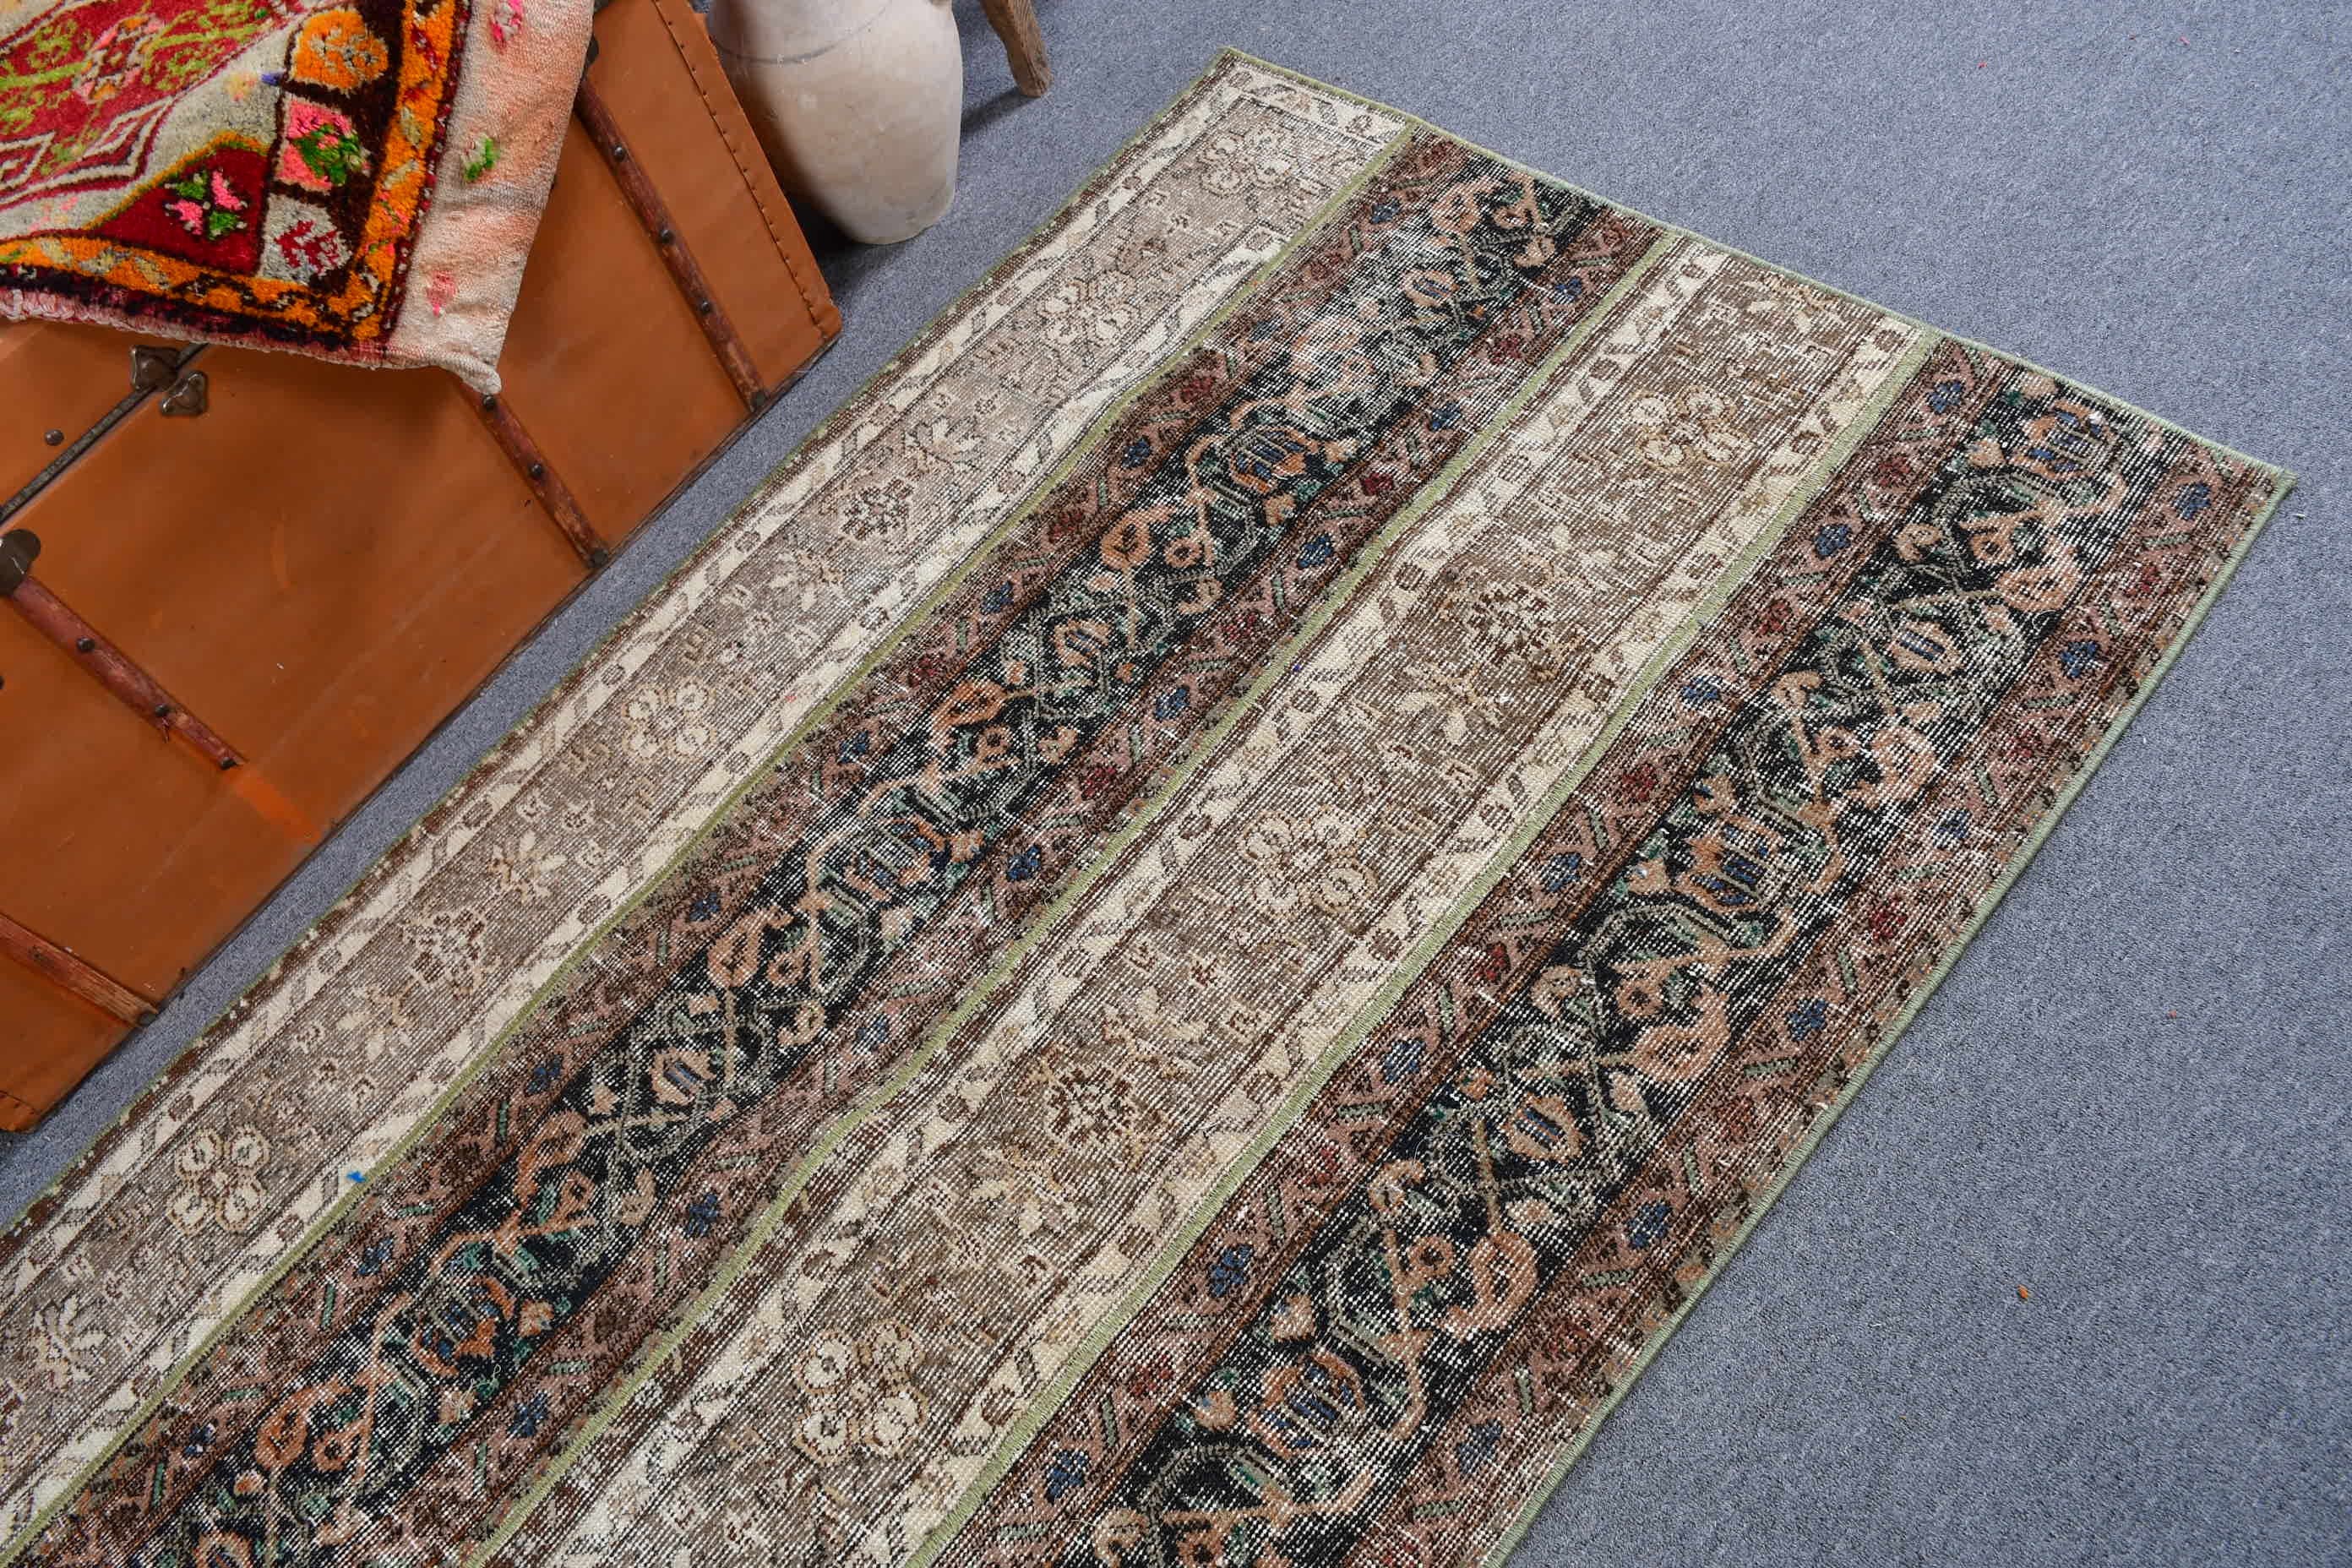 Vintage Rug, Kitchen Rugs, Nursery Rugs, Entryway Rug Rugs, 3.4x6.2 ft Accent Rugs, Cool Rug, Turkish Rug, Rugs for Entry, Oushak Rugs